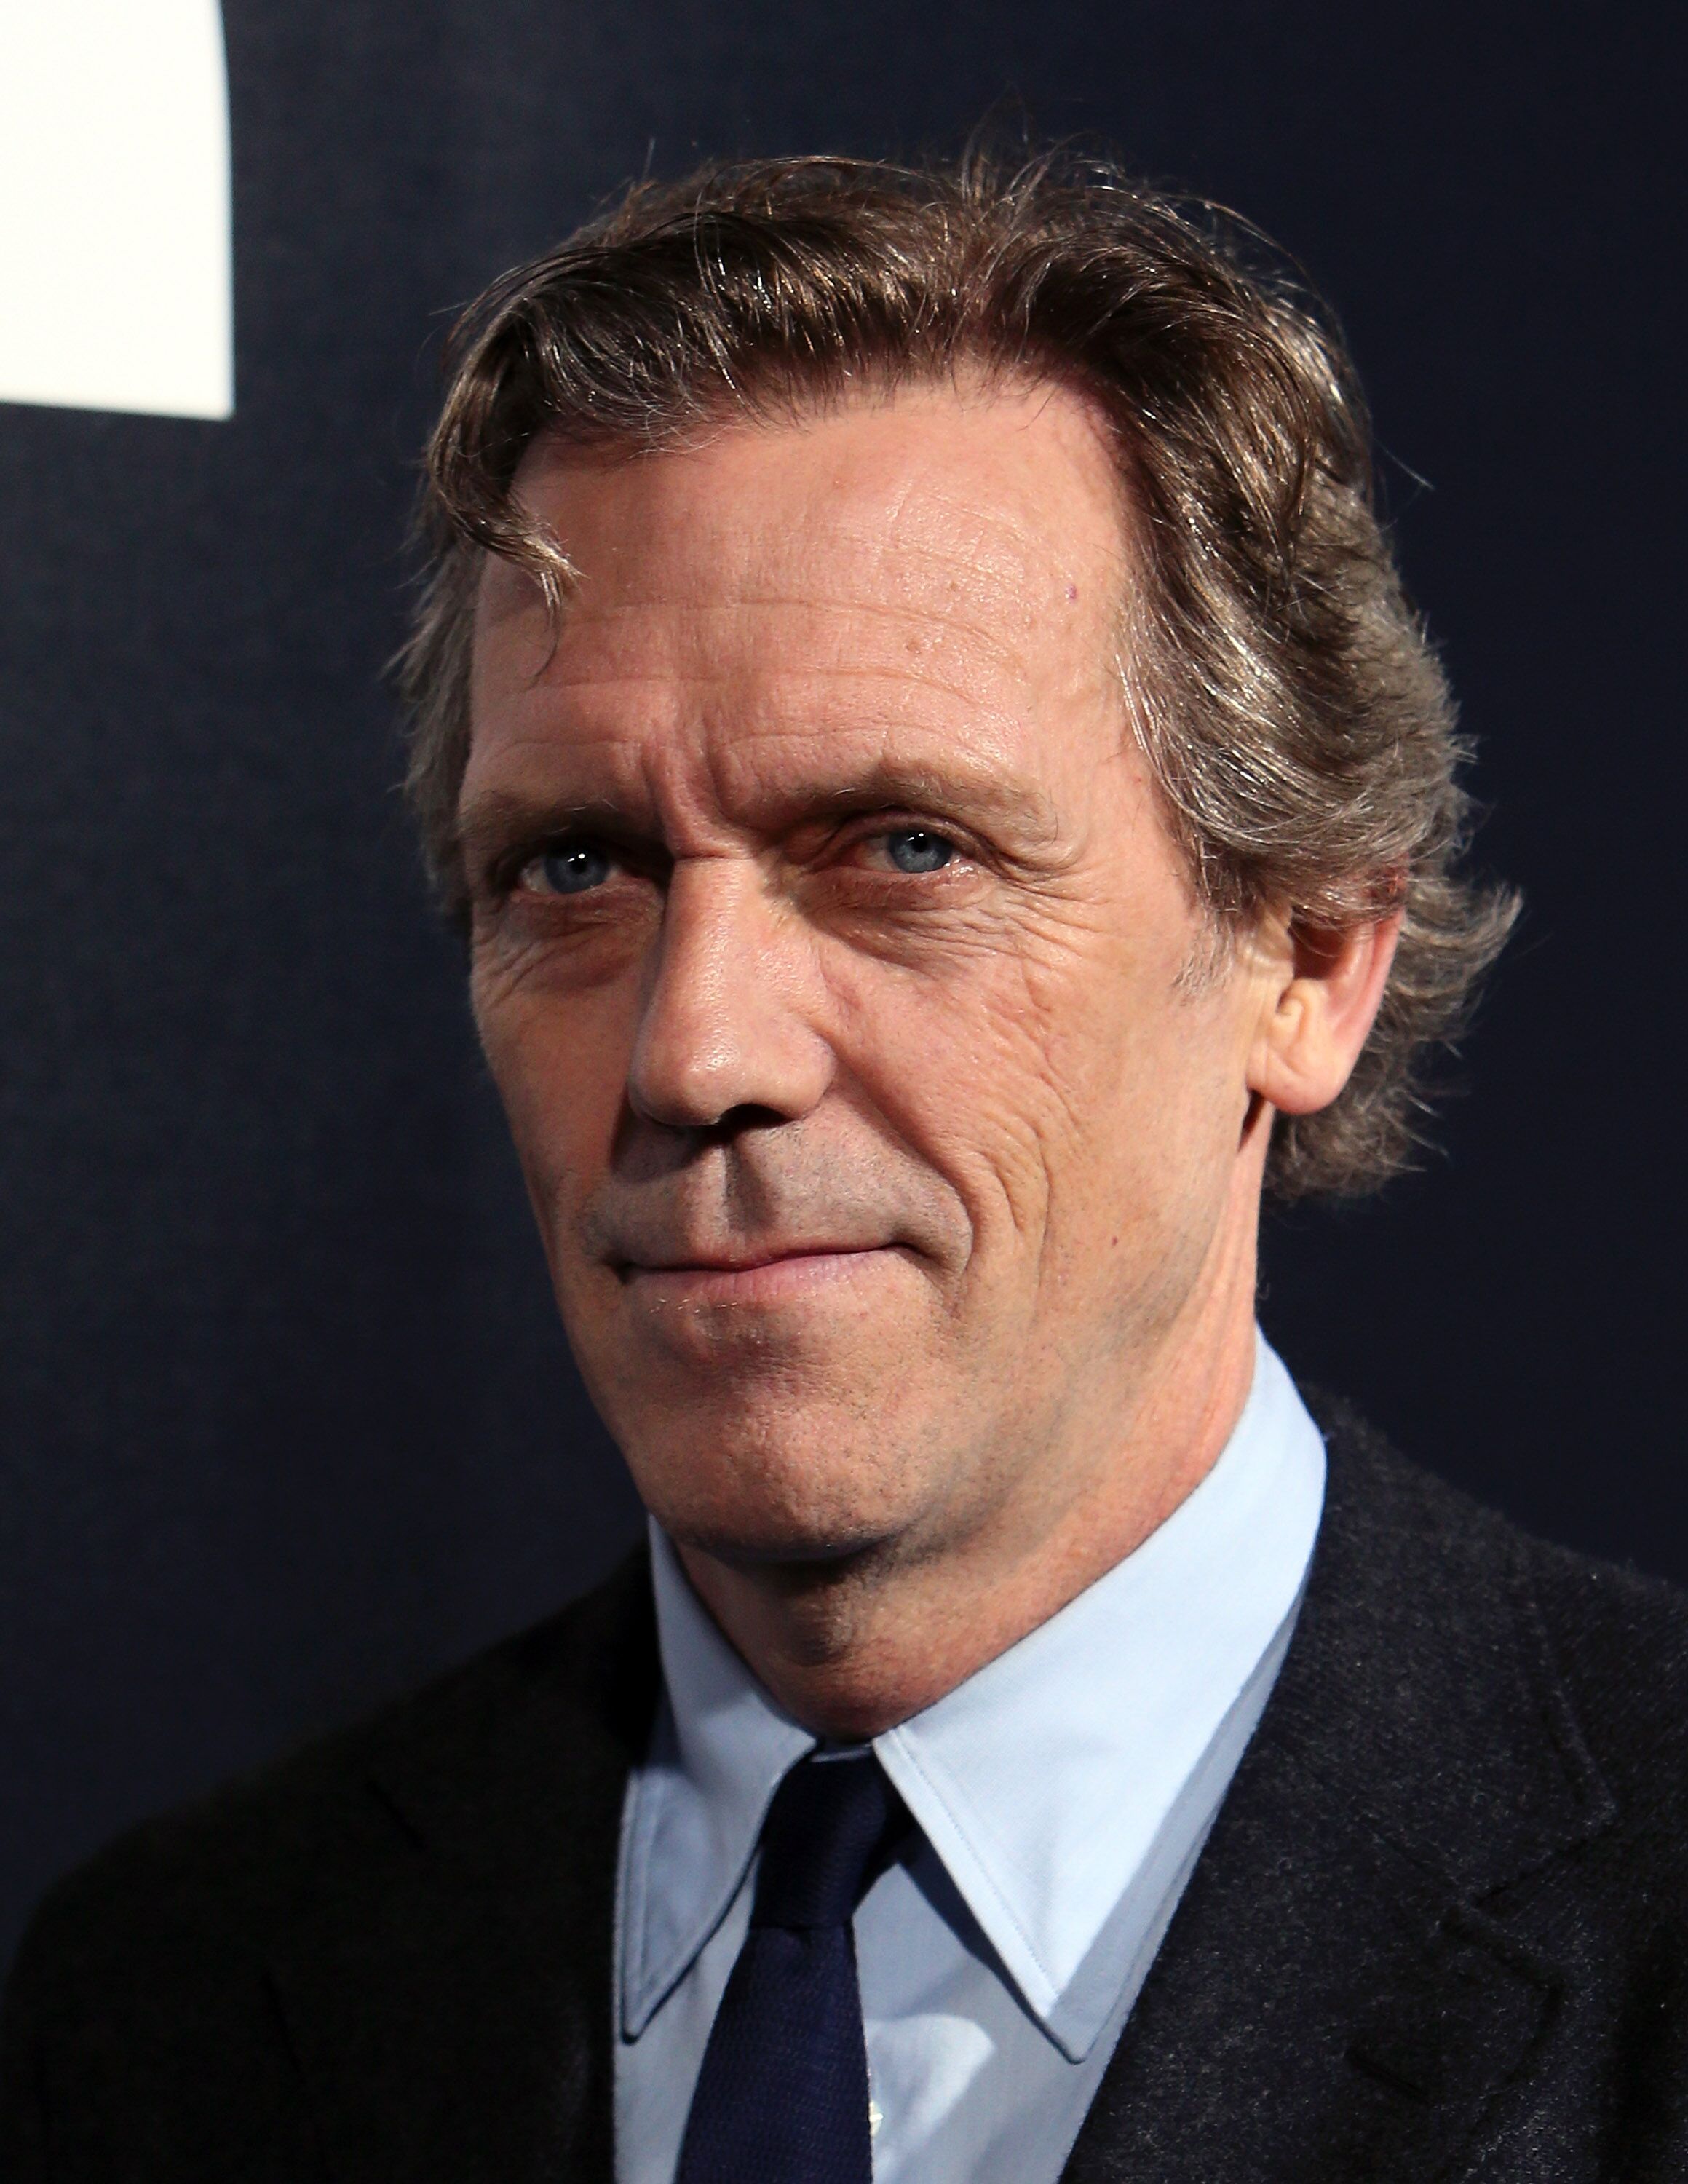 Hugh Laurie attends the premiere of Hulu's "Chance" at Harmony Gold Theatre. | Source: Getty Images